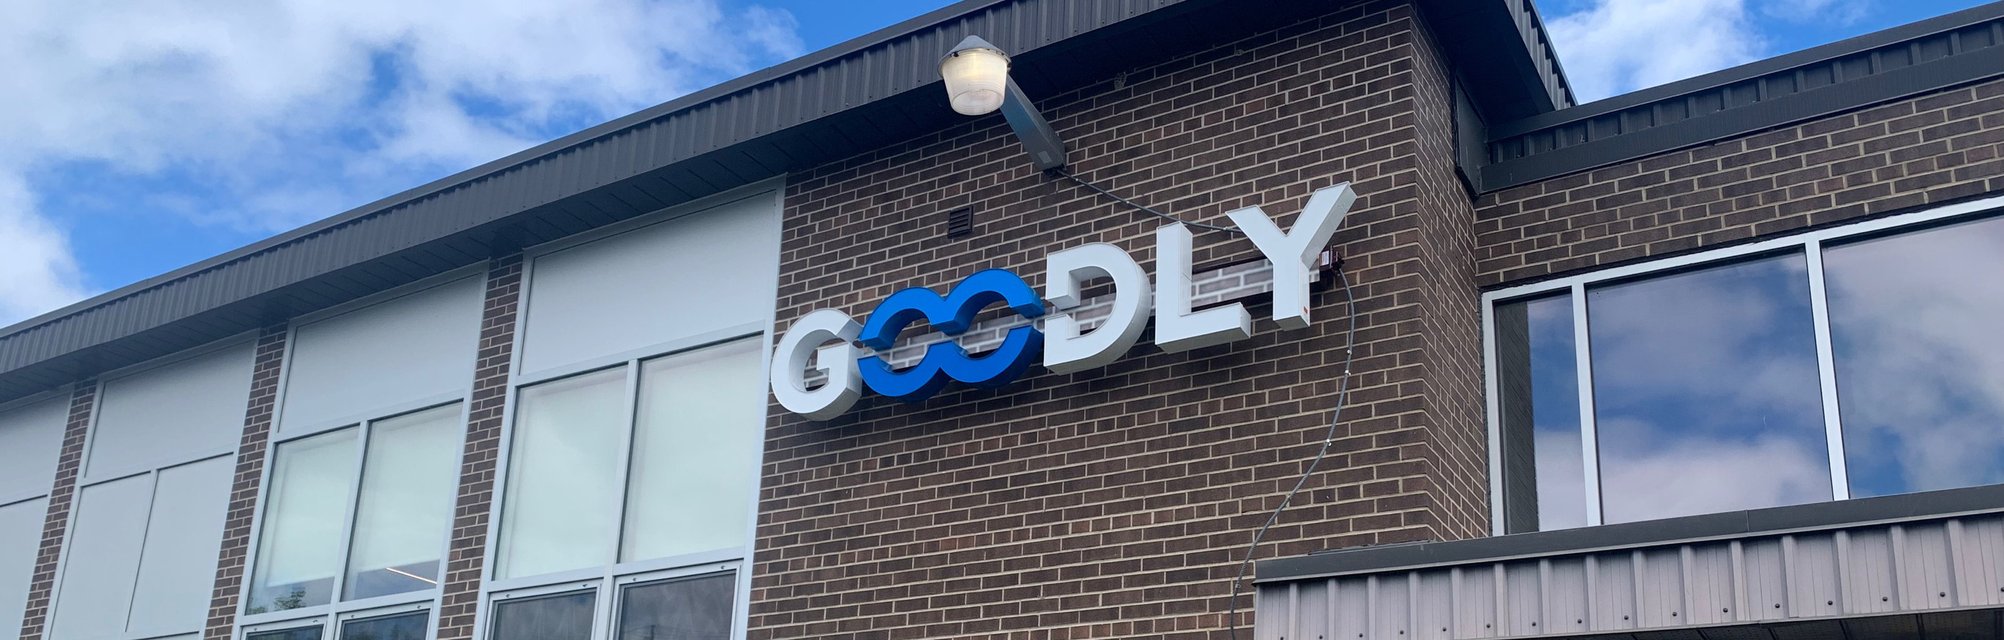 Featured Image: Hardware Lifecycle Management - Goodly Cloud Headquarters - Read full post: Goodly Cloud Debuts to Make Hardware Lifecycle Management Simple